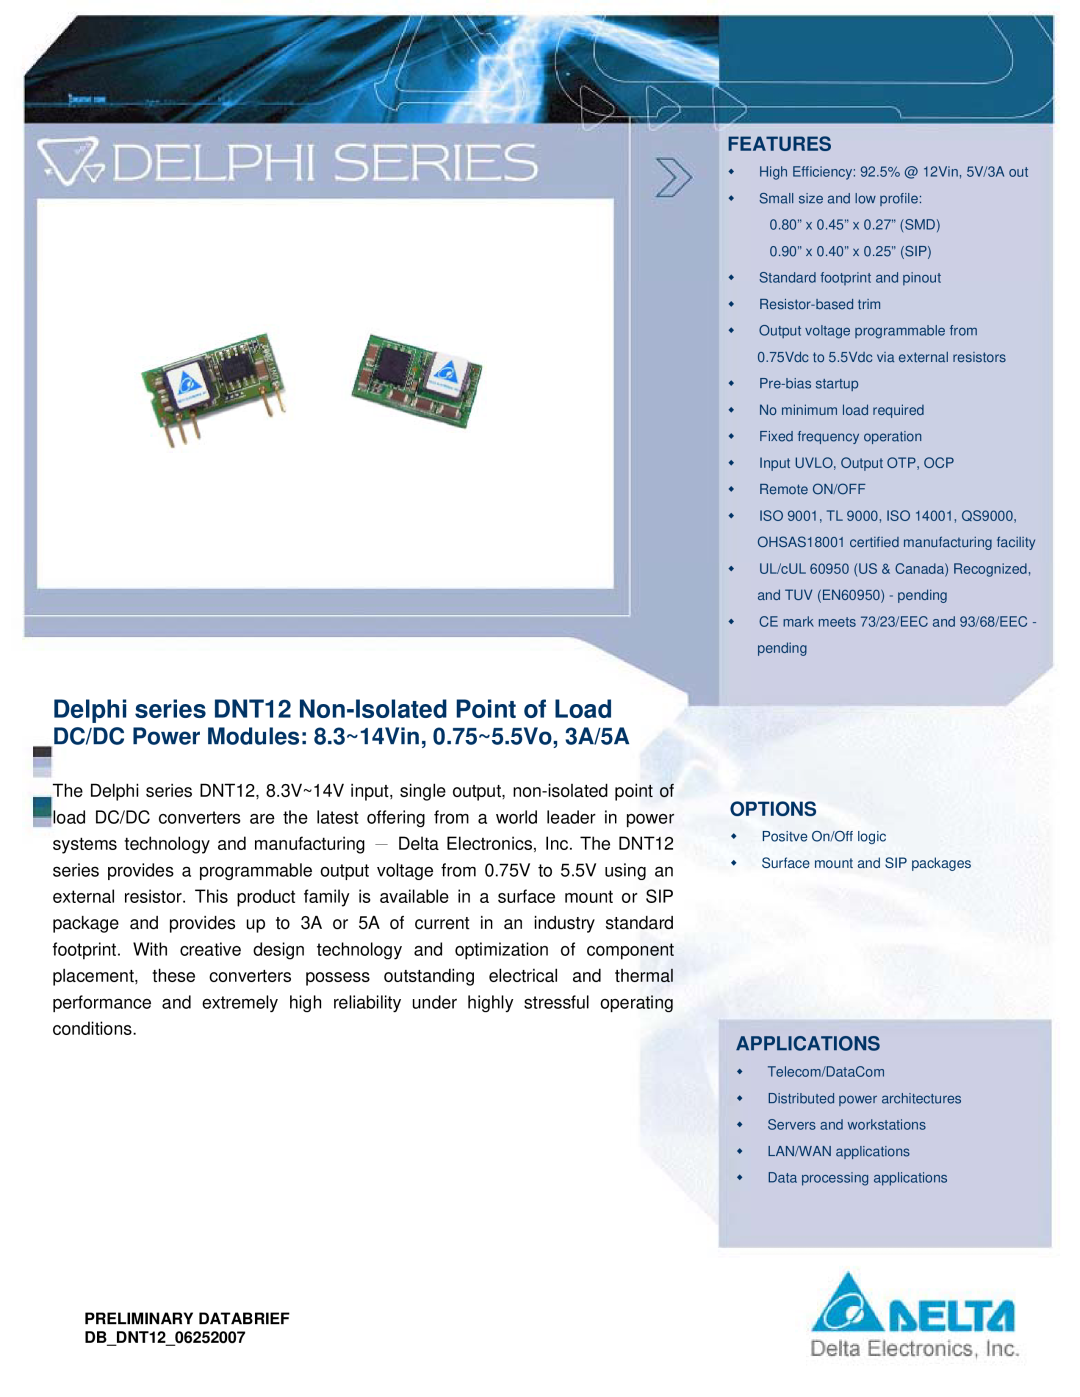 Delta Electronics Series DNT12 manual Features, Options, Applications, Delphi series DNT12 Non-Isolated Point of Load 